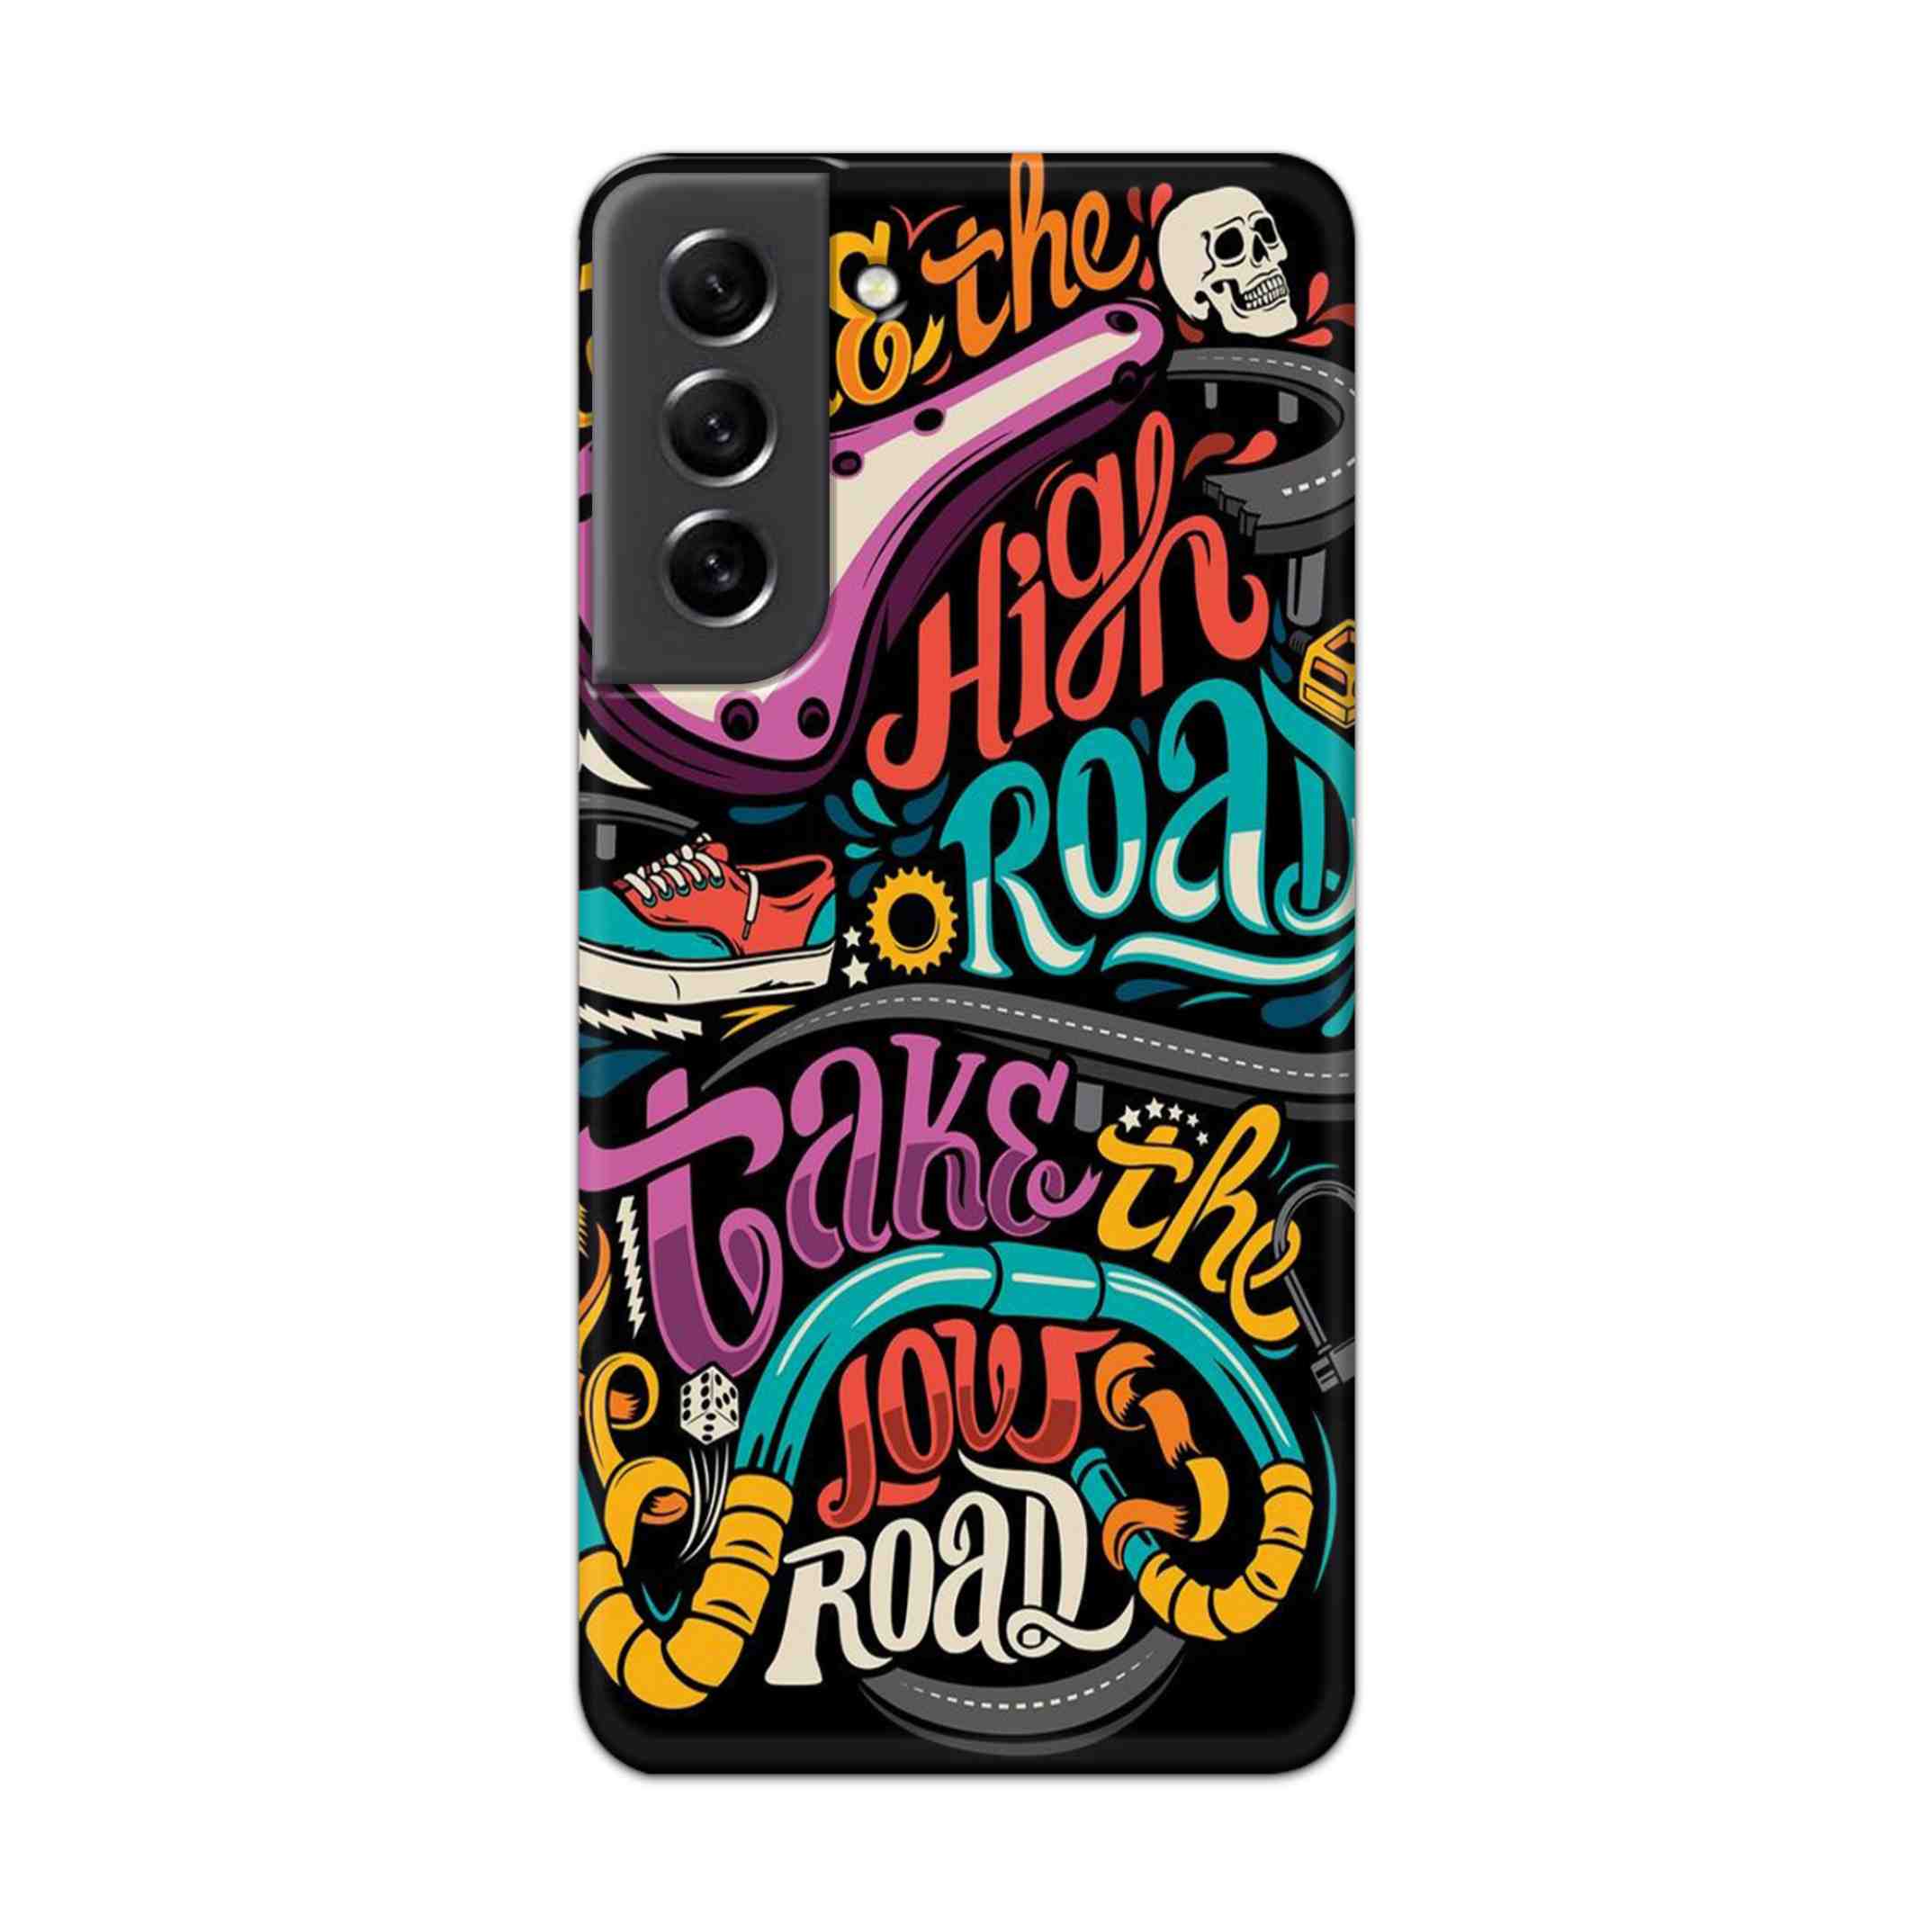 Buy Take The High Road Hard Back Mobile Phone Case Cover For Samsung S21 FE Online